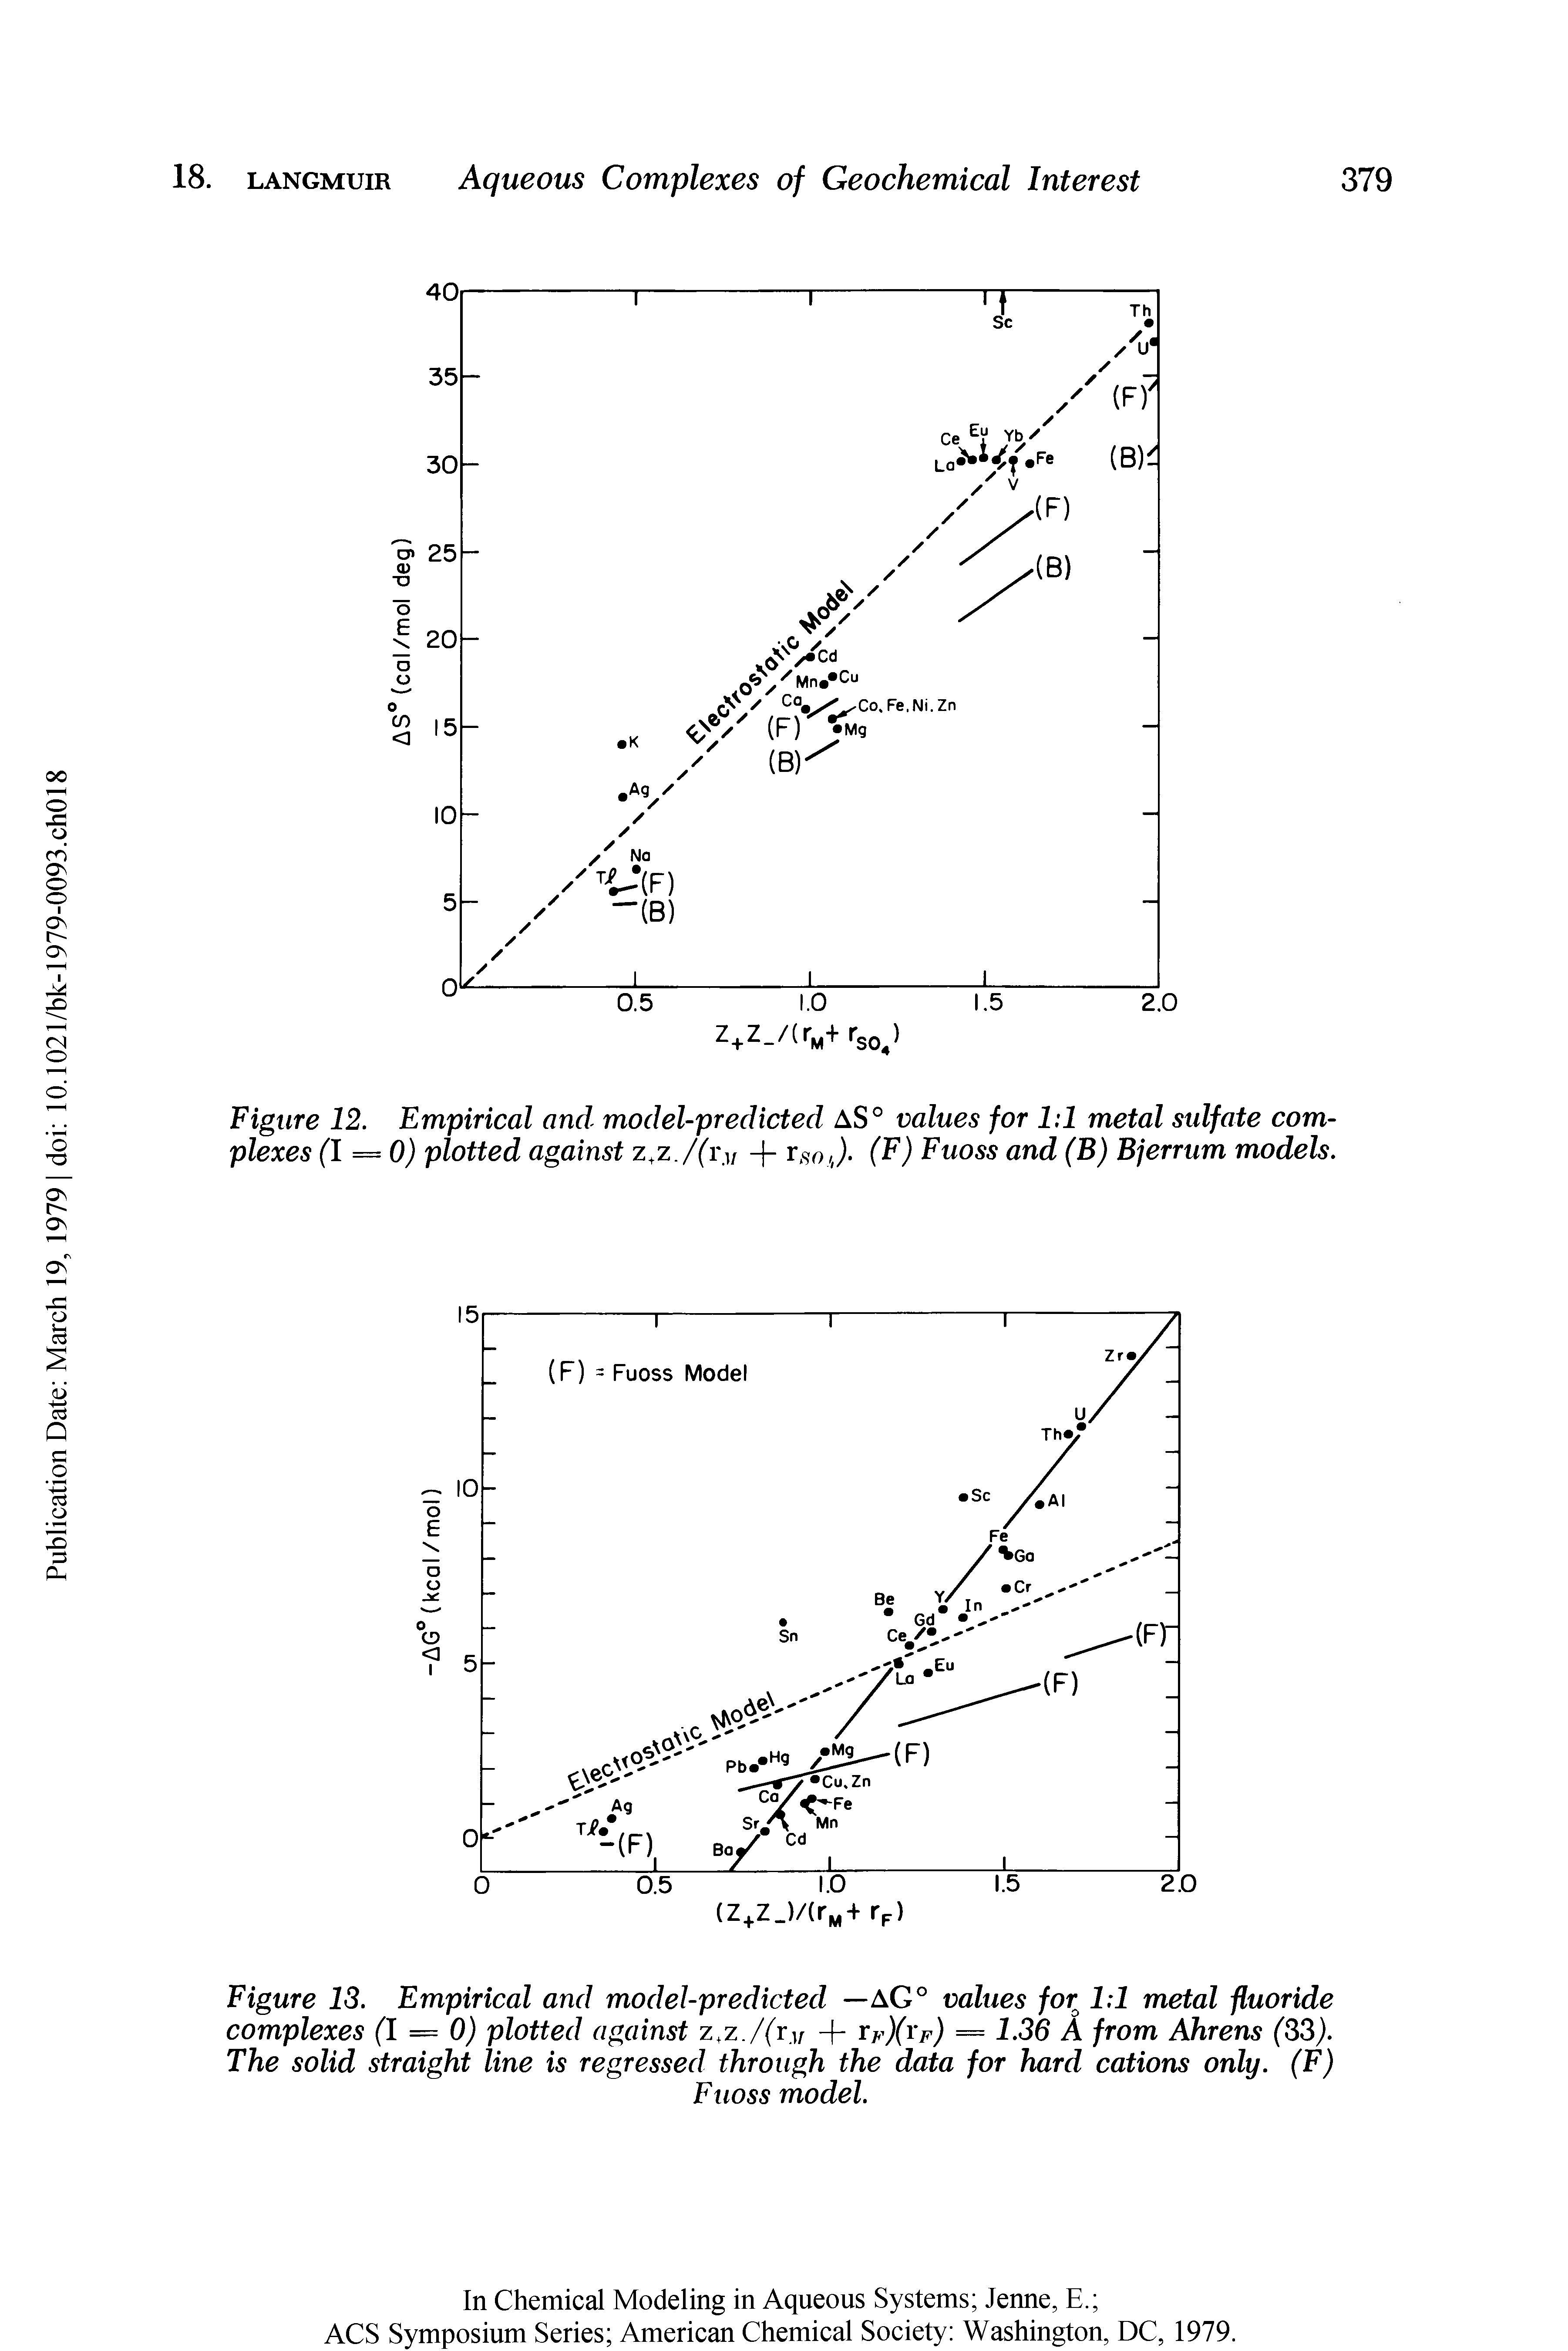 Figure 13. Empirical and model-predicted — aG° values for 1 1 metal fluoride complexes = 0) plotted against z,z./(xm + = 1.36 A from Ahrens (S3).